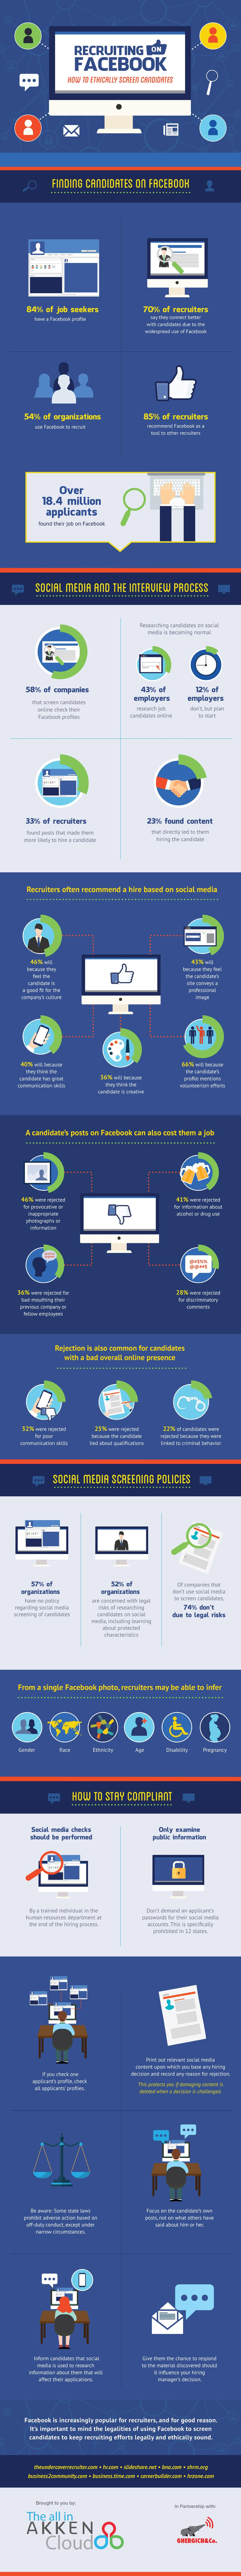 Recruiting on Facebook: How to Ethically Screen Candidates